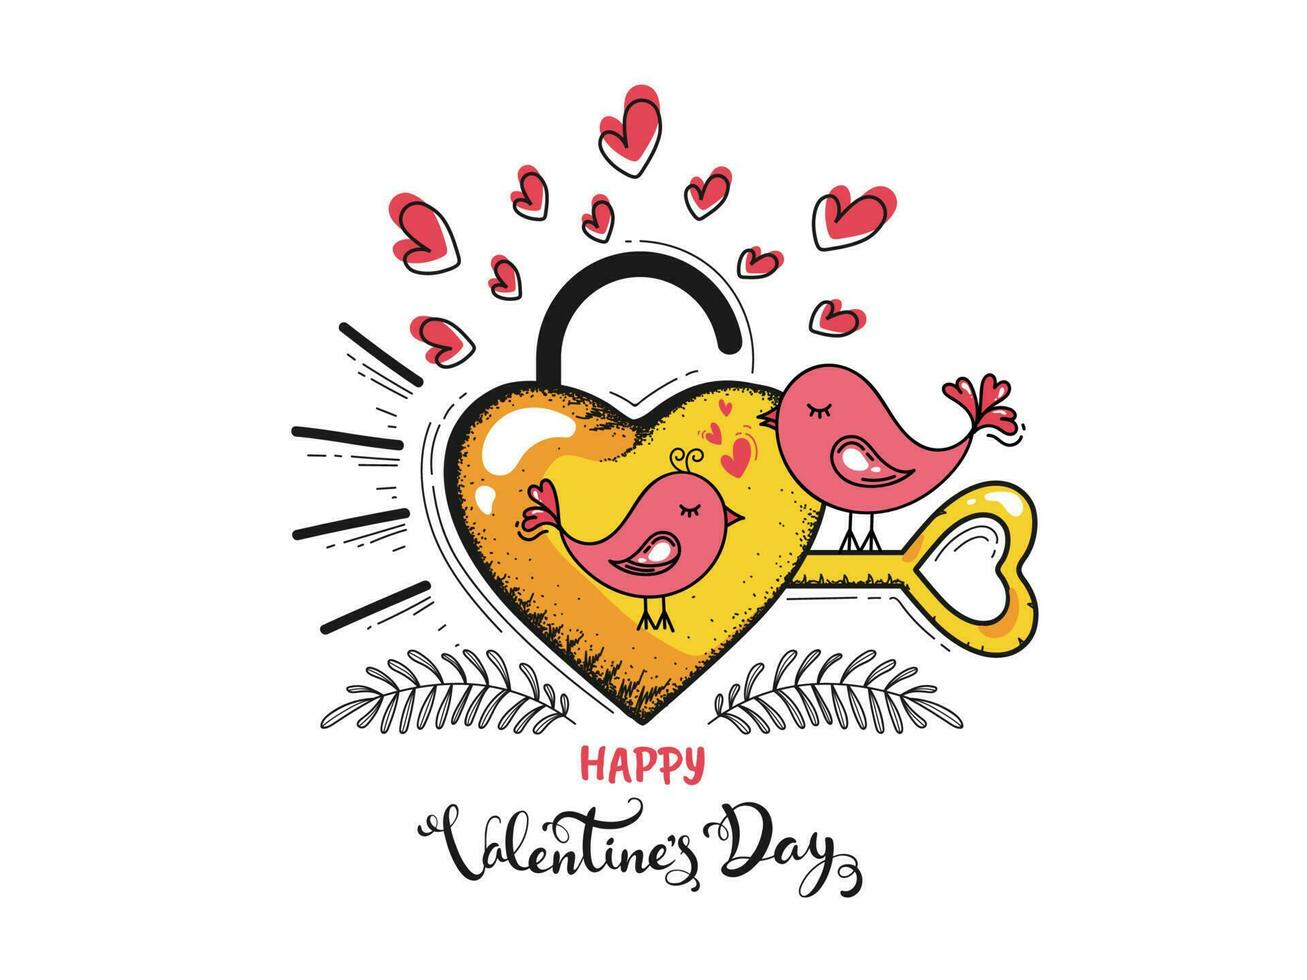 Flat Style Loving Birds Couple with Heart Lock and Key on White Background for Happy Valentine's Day Celebration Concept. vector